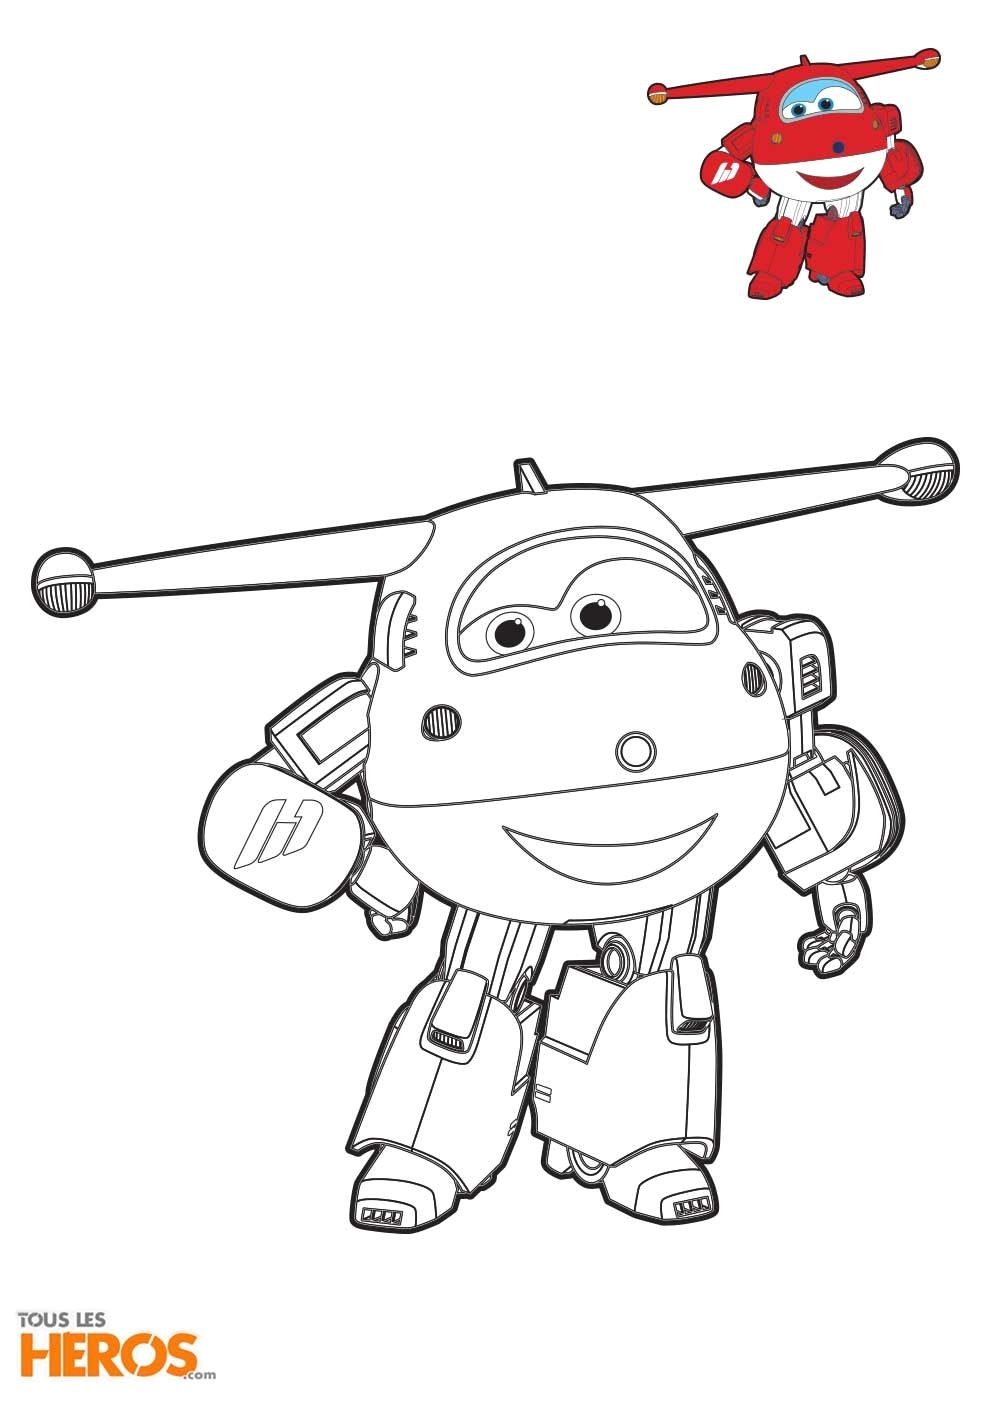 coloriage super wings3 9921403 Ð Ð°ÑÐºÑÐ°ÑÐºÐ¸ Ð¿Ð¾ ÑÐ¸ÑÑÐ°Ð¼ Pinterest